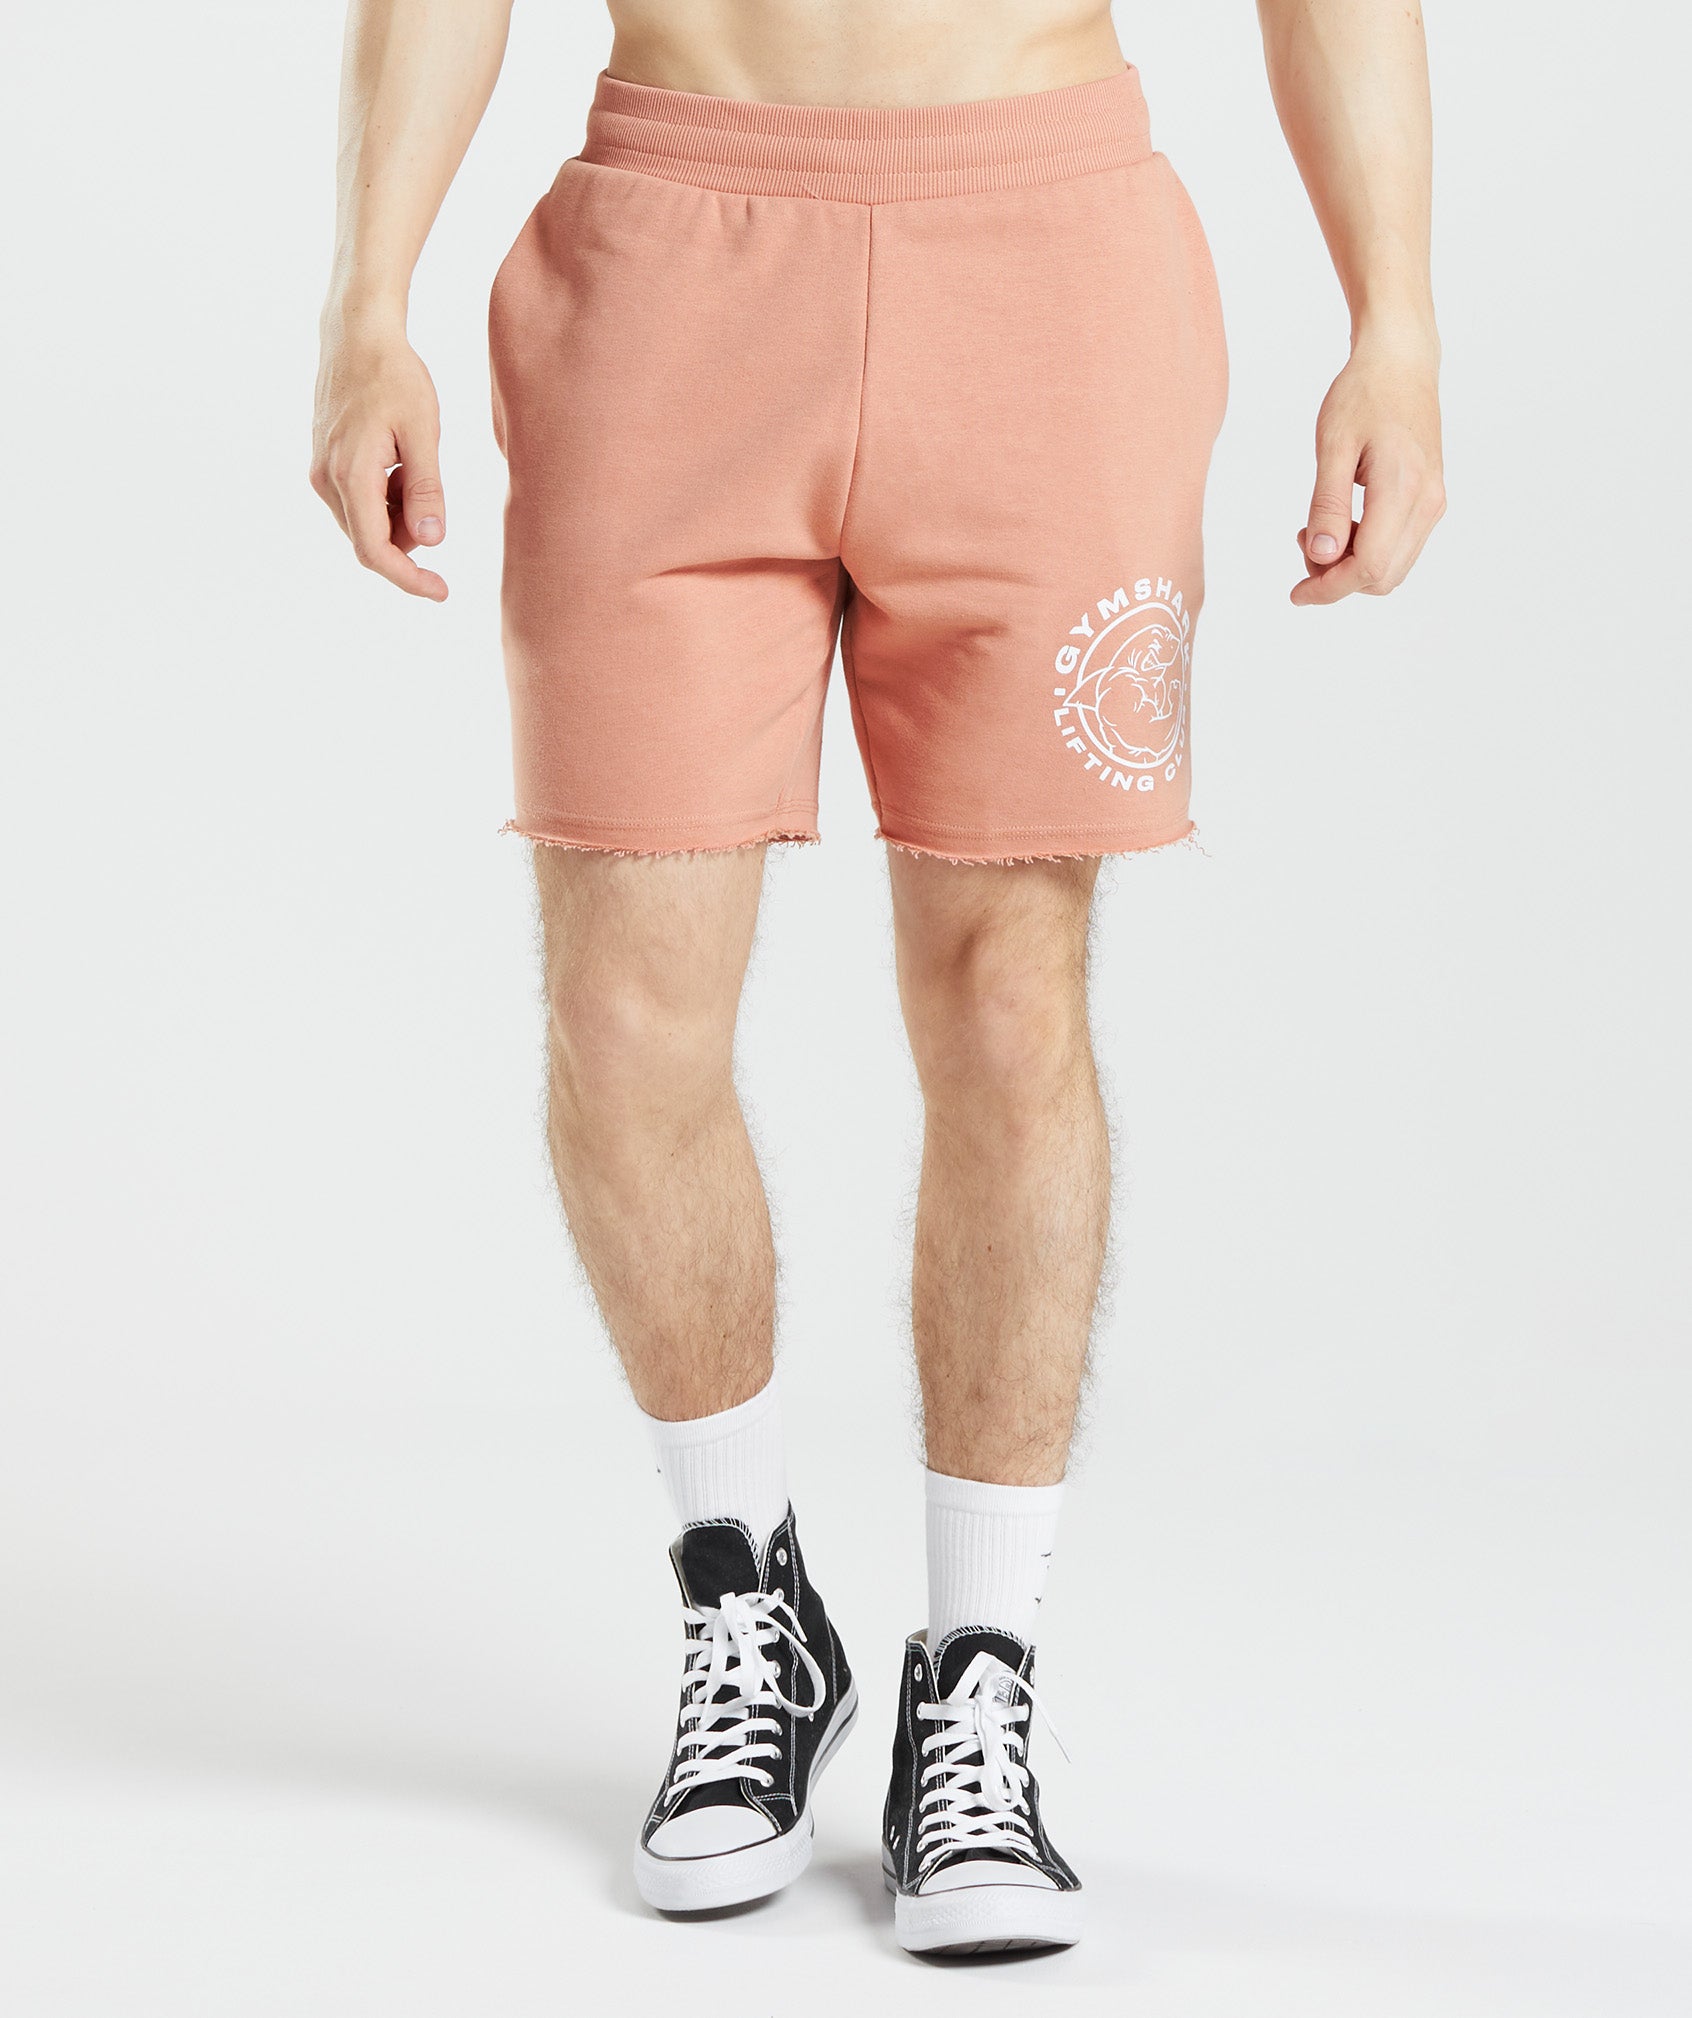 Legacy Shorts in Nevada Pink - view 1